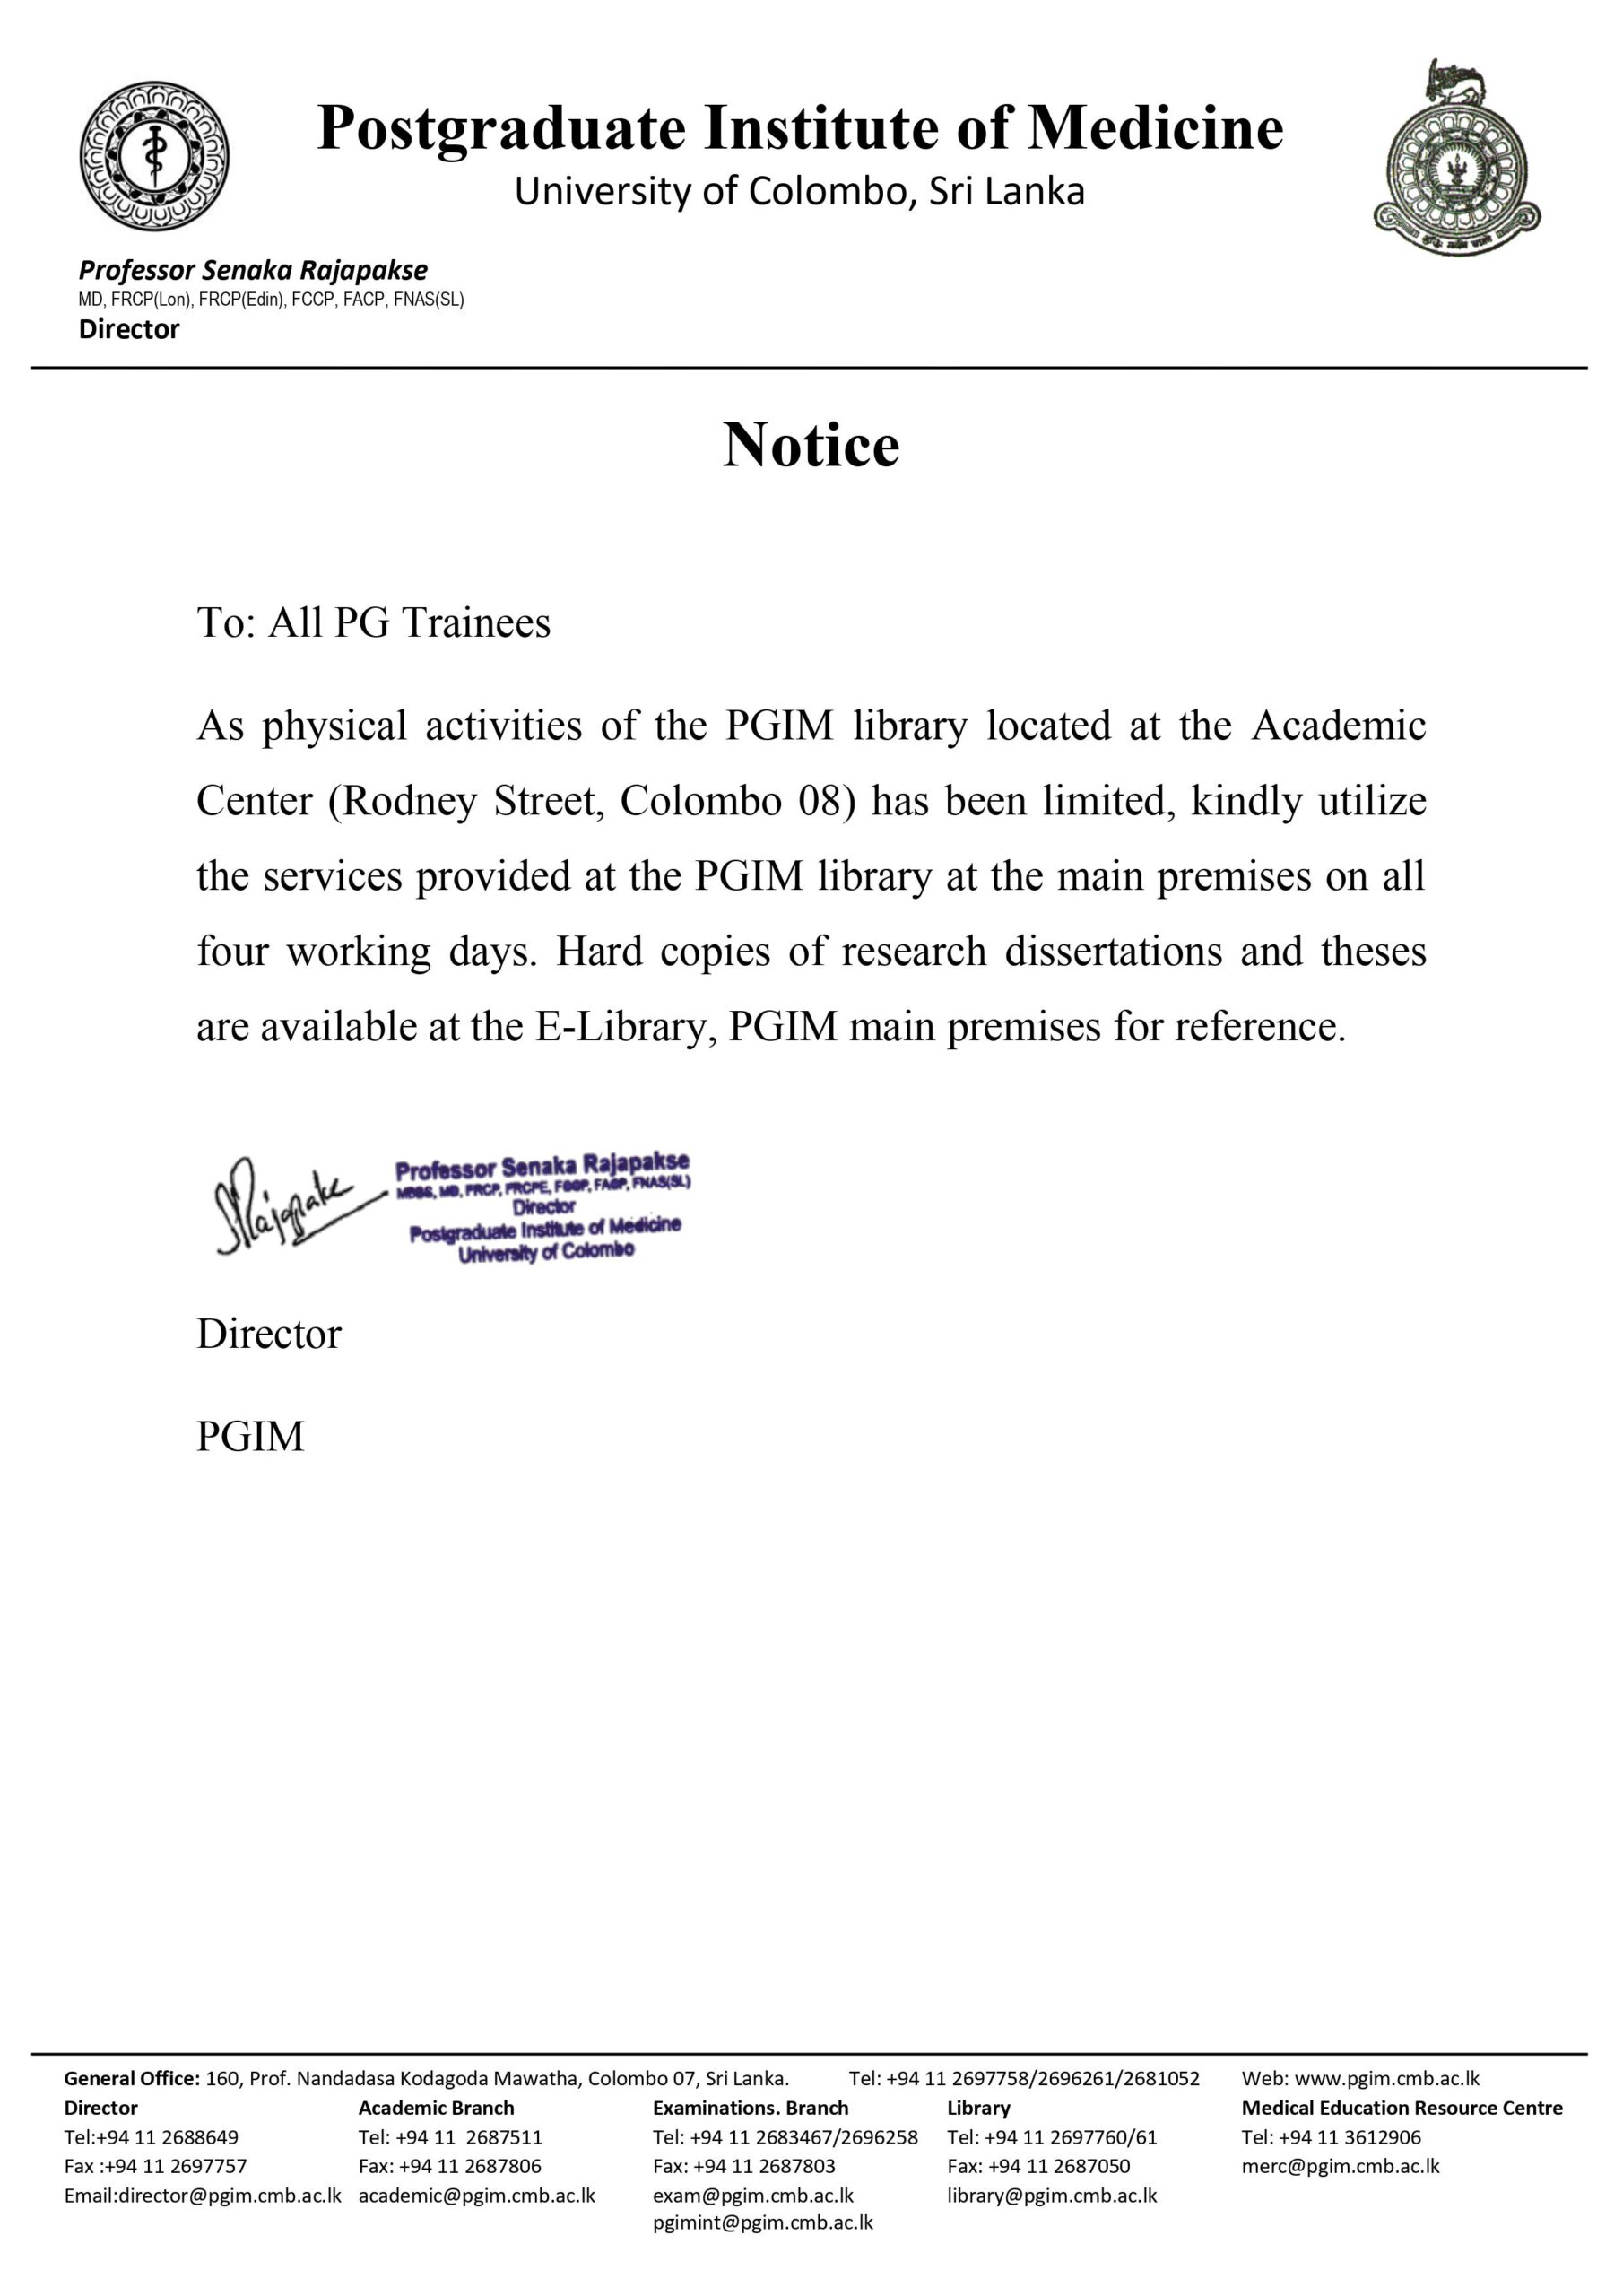 Notice to all PG Trainees